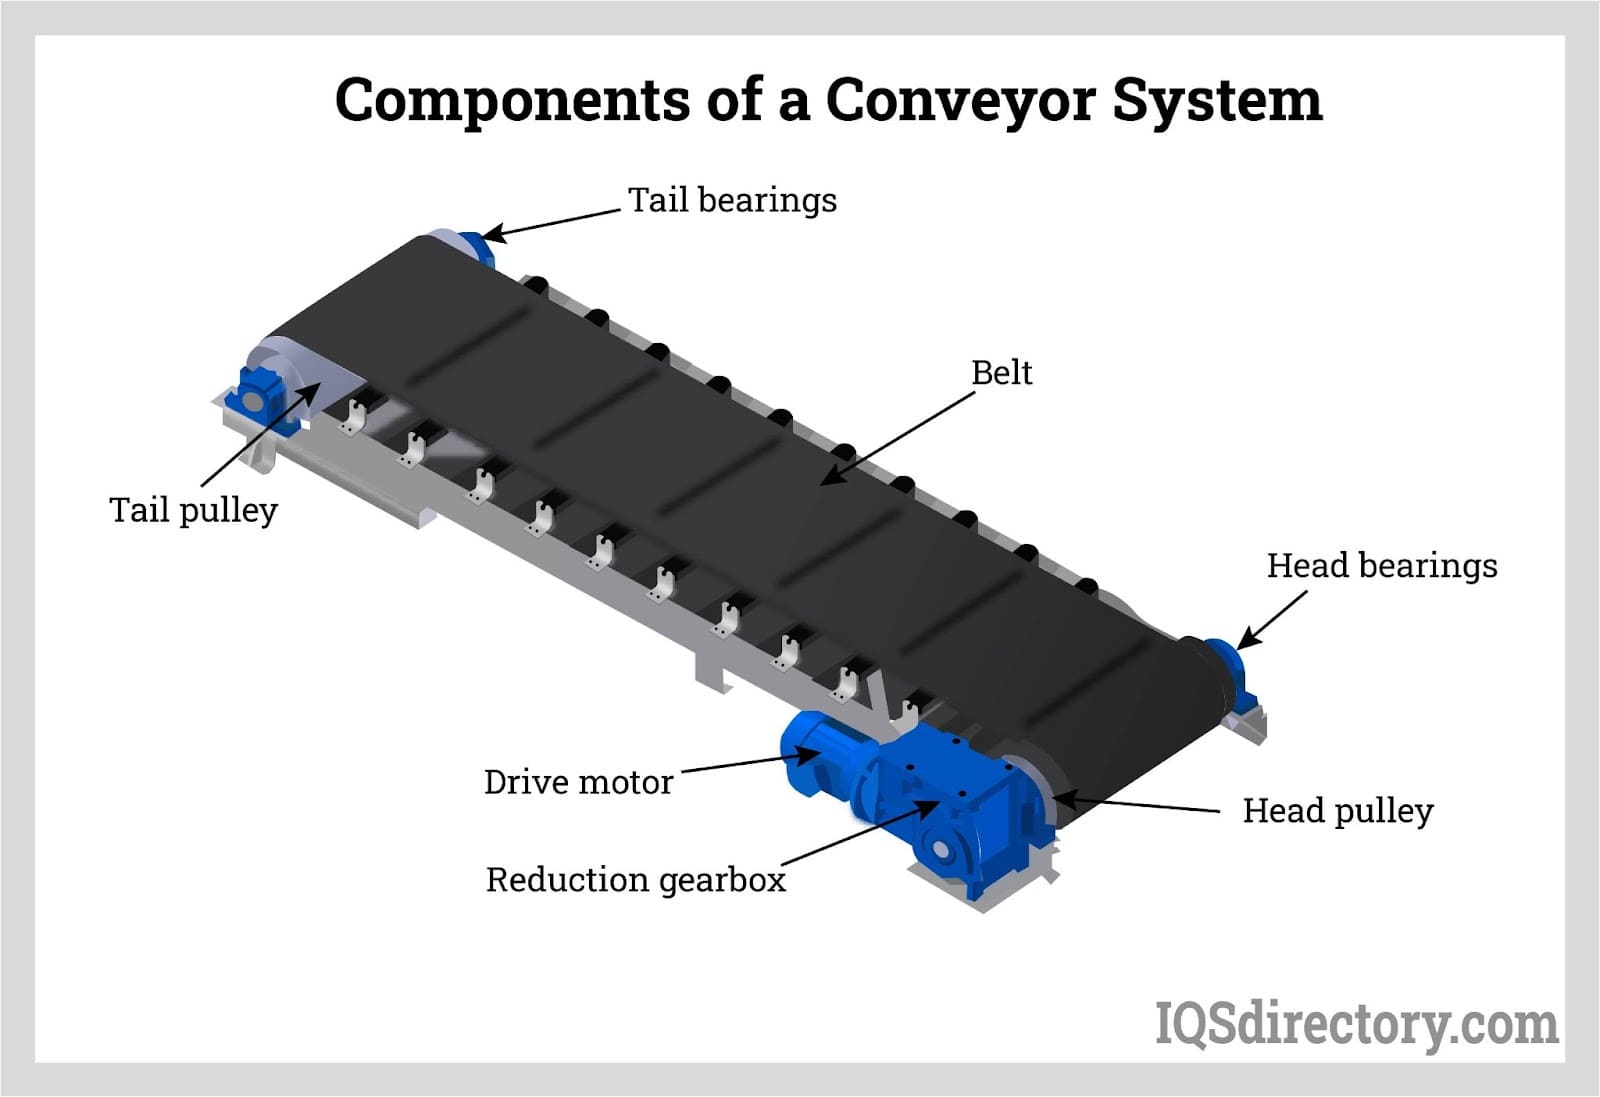 Components of a Conveyor System